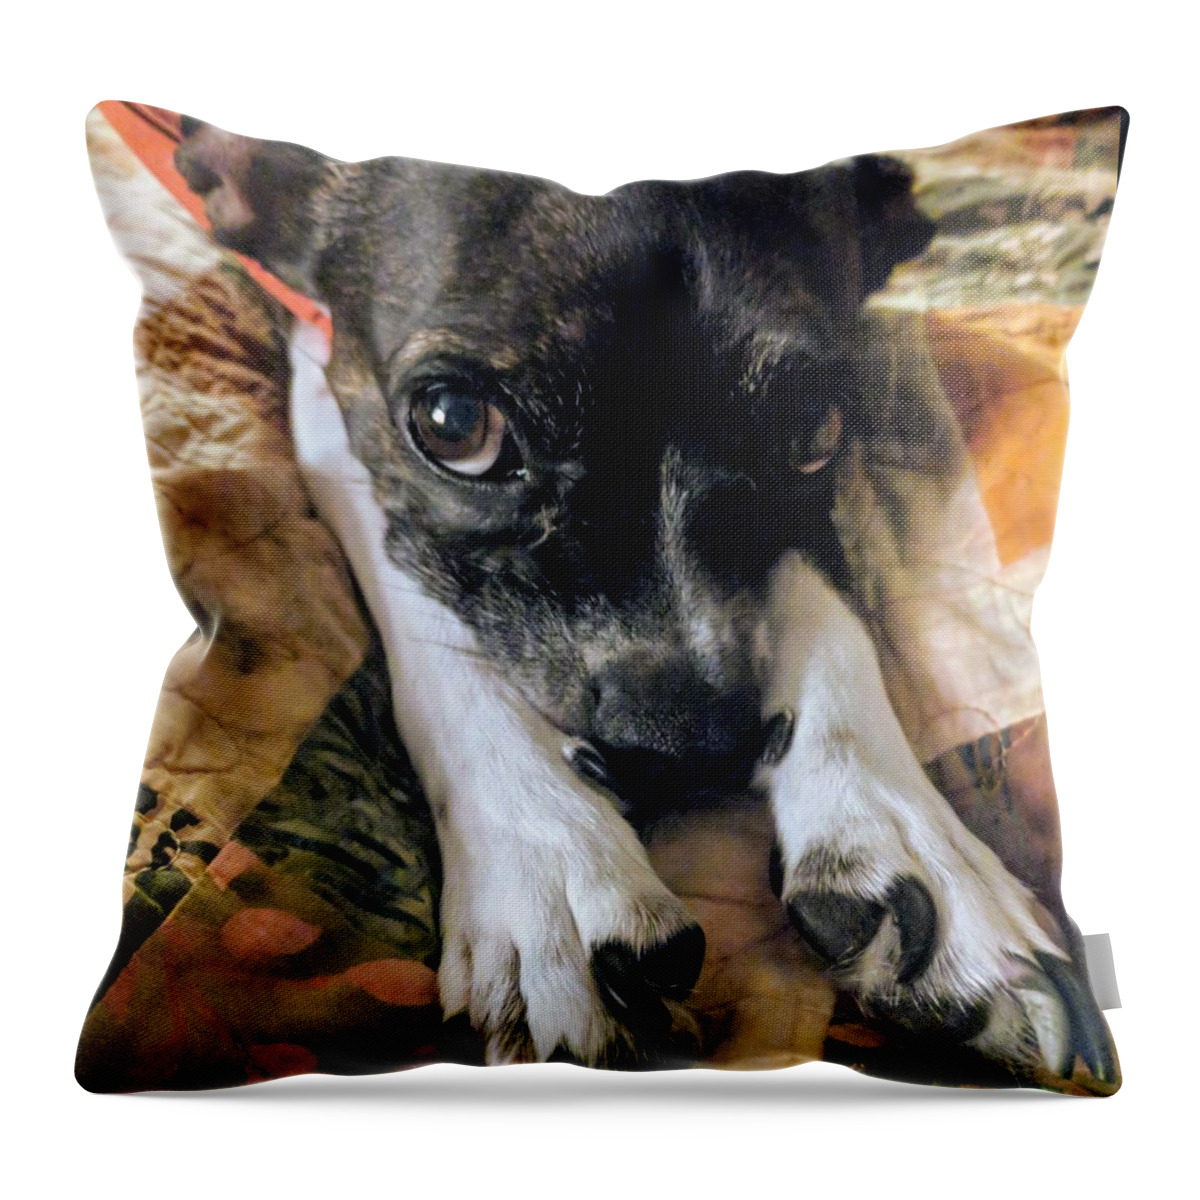 Puppy Throw Pillow featuring the photograph Paws by Misty Morehead